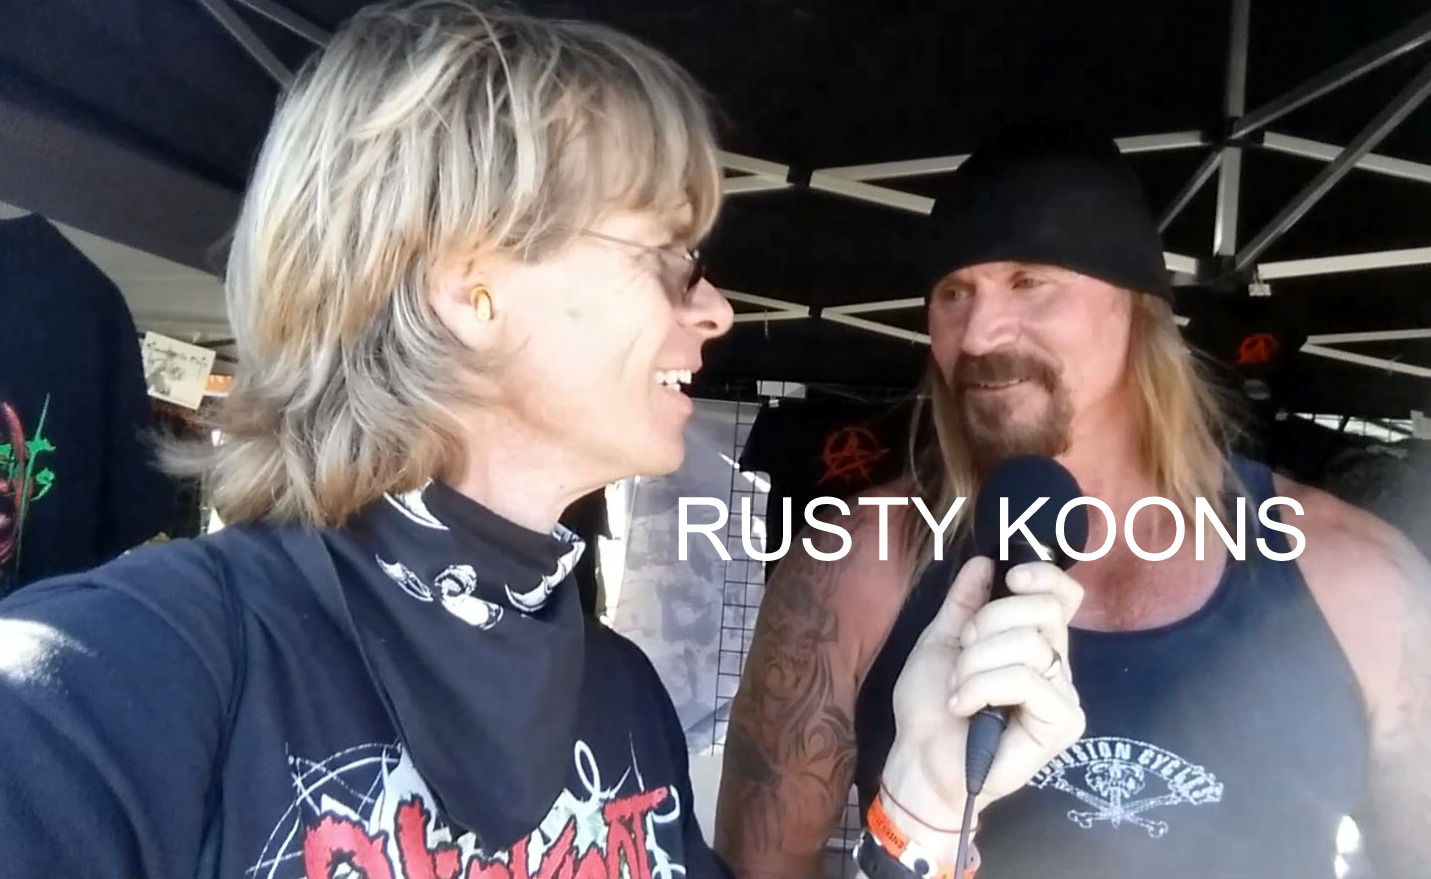 Gregory Graham aka Heavy Metal Greg interviewing Rusty Koons of the show Sons of Anarchy at the 2015 Knotfest.